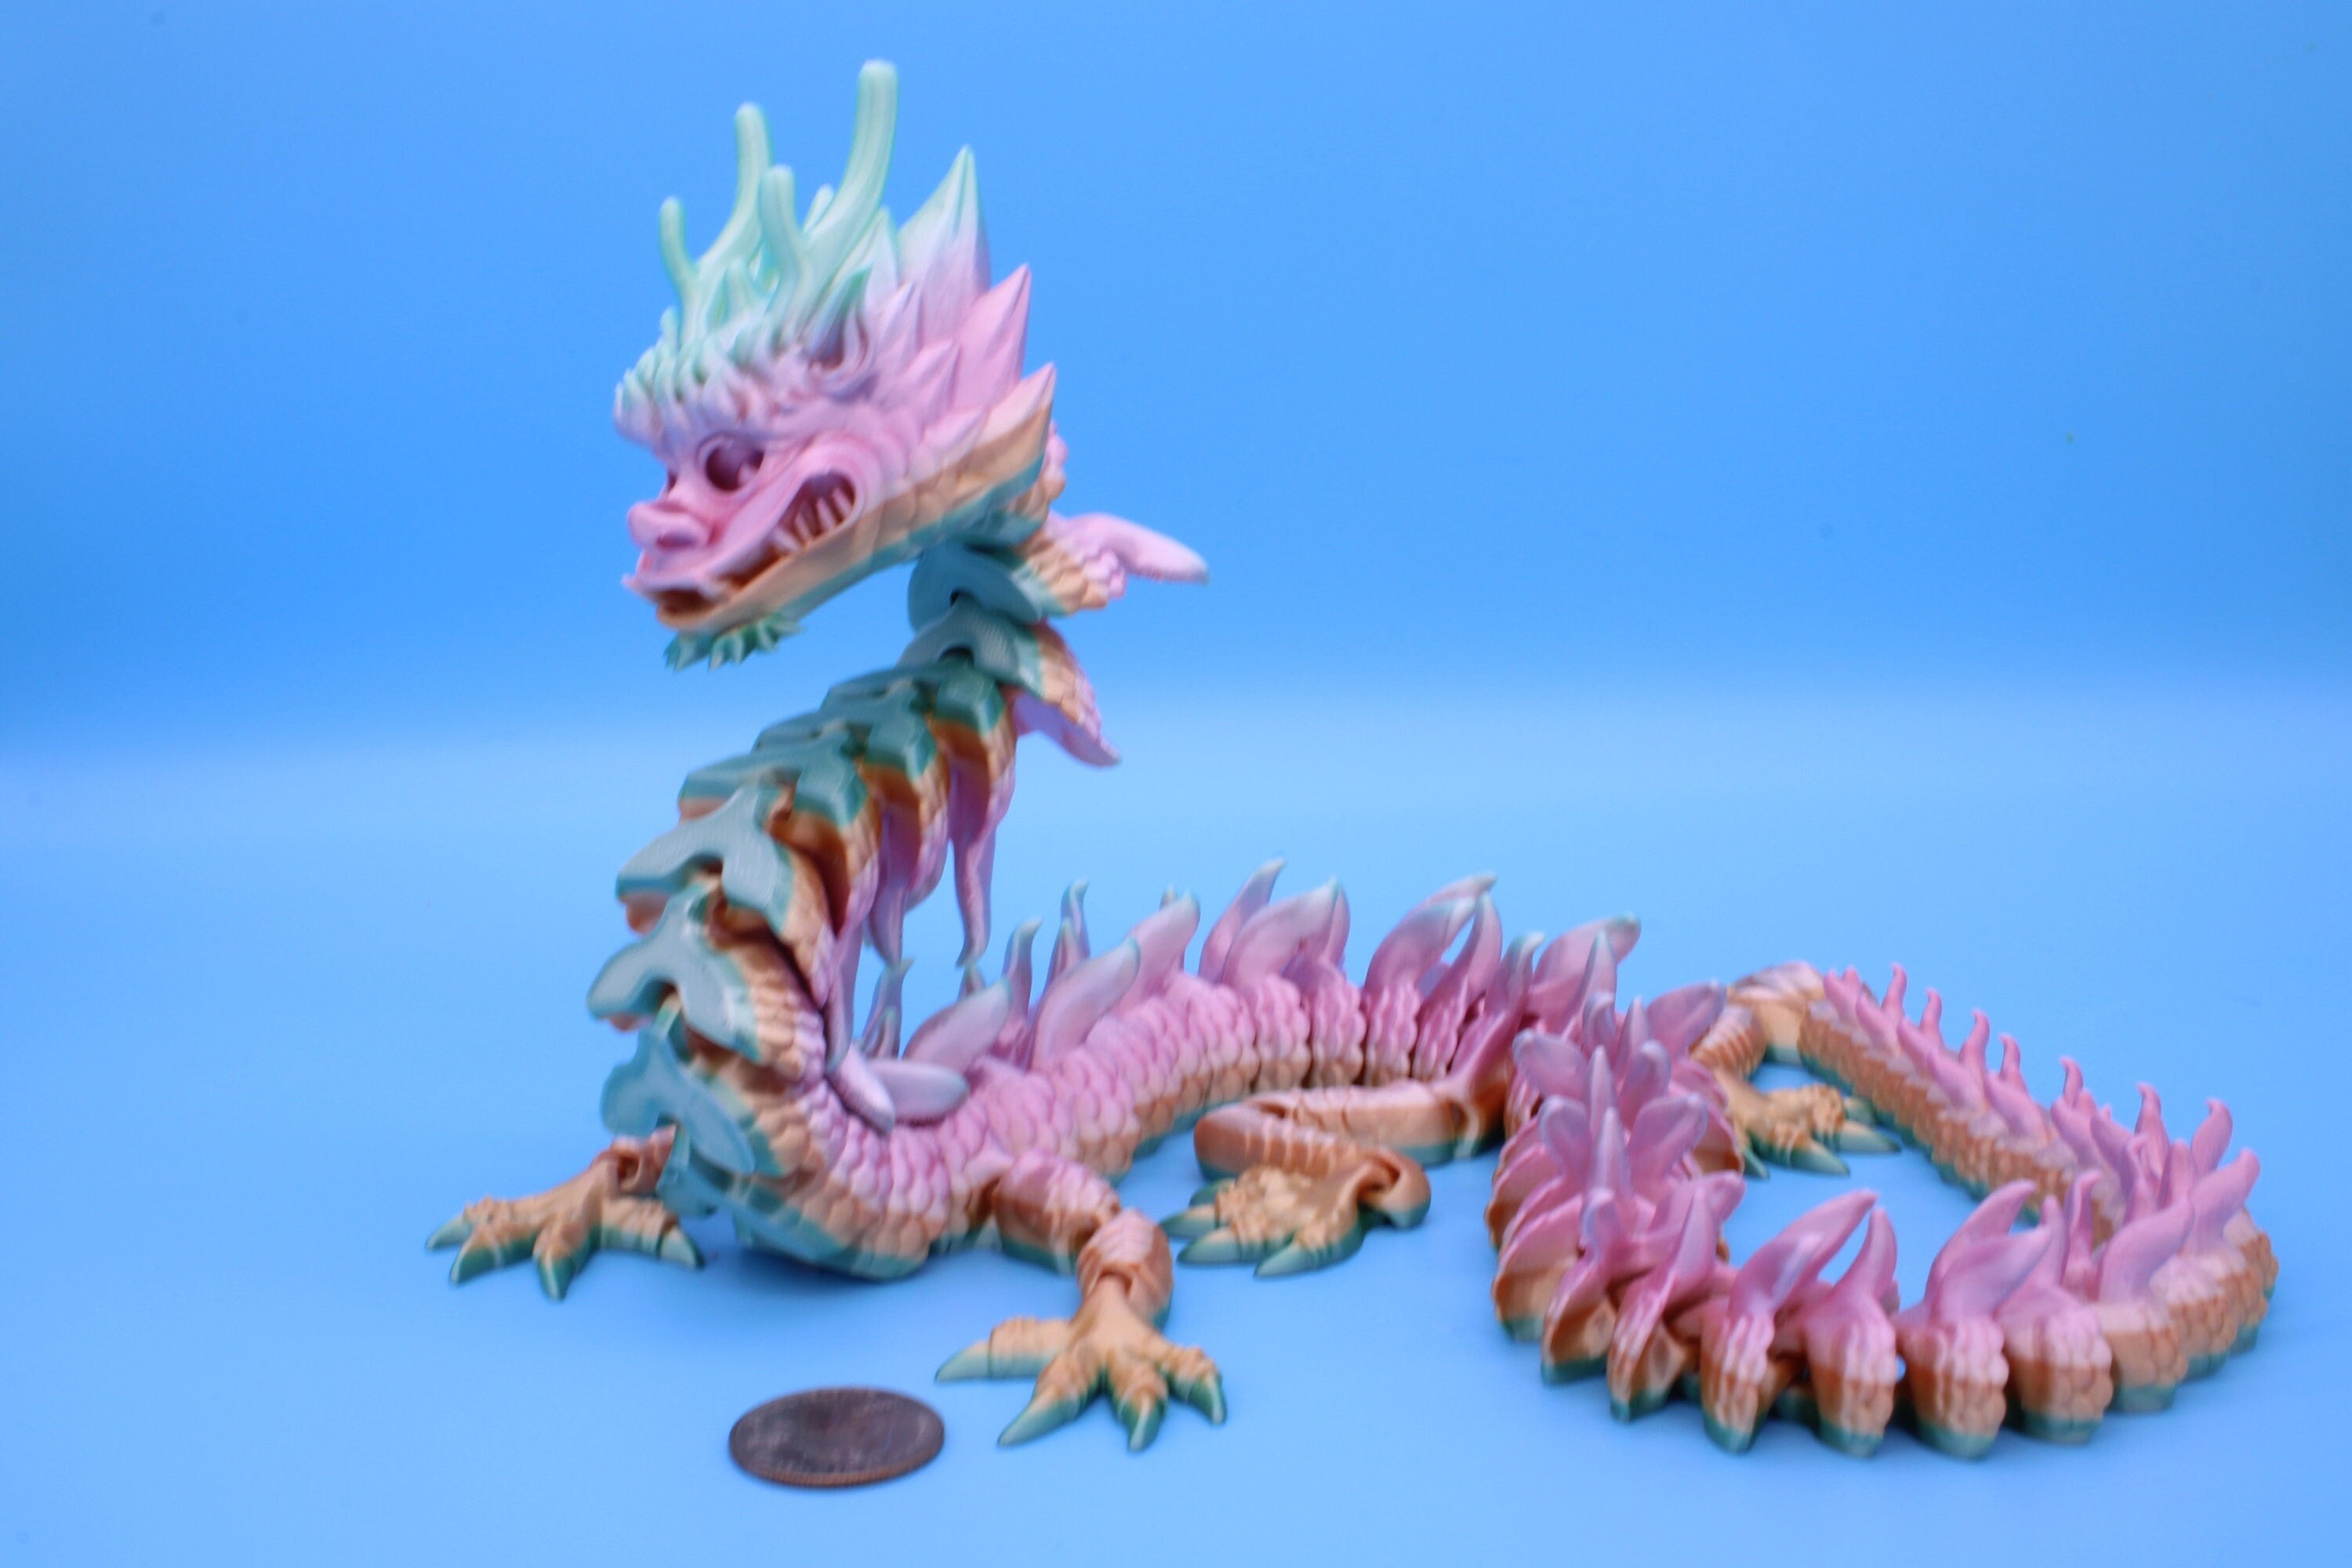 Imperial Dragon- Rainbow | 27 in. | Fidget Toy Dragon | 3D printed | Pet Flexi Dragon | Stress Relief Gift